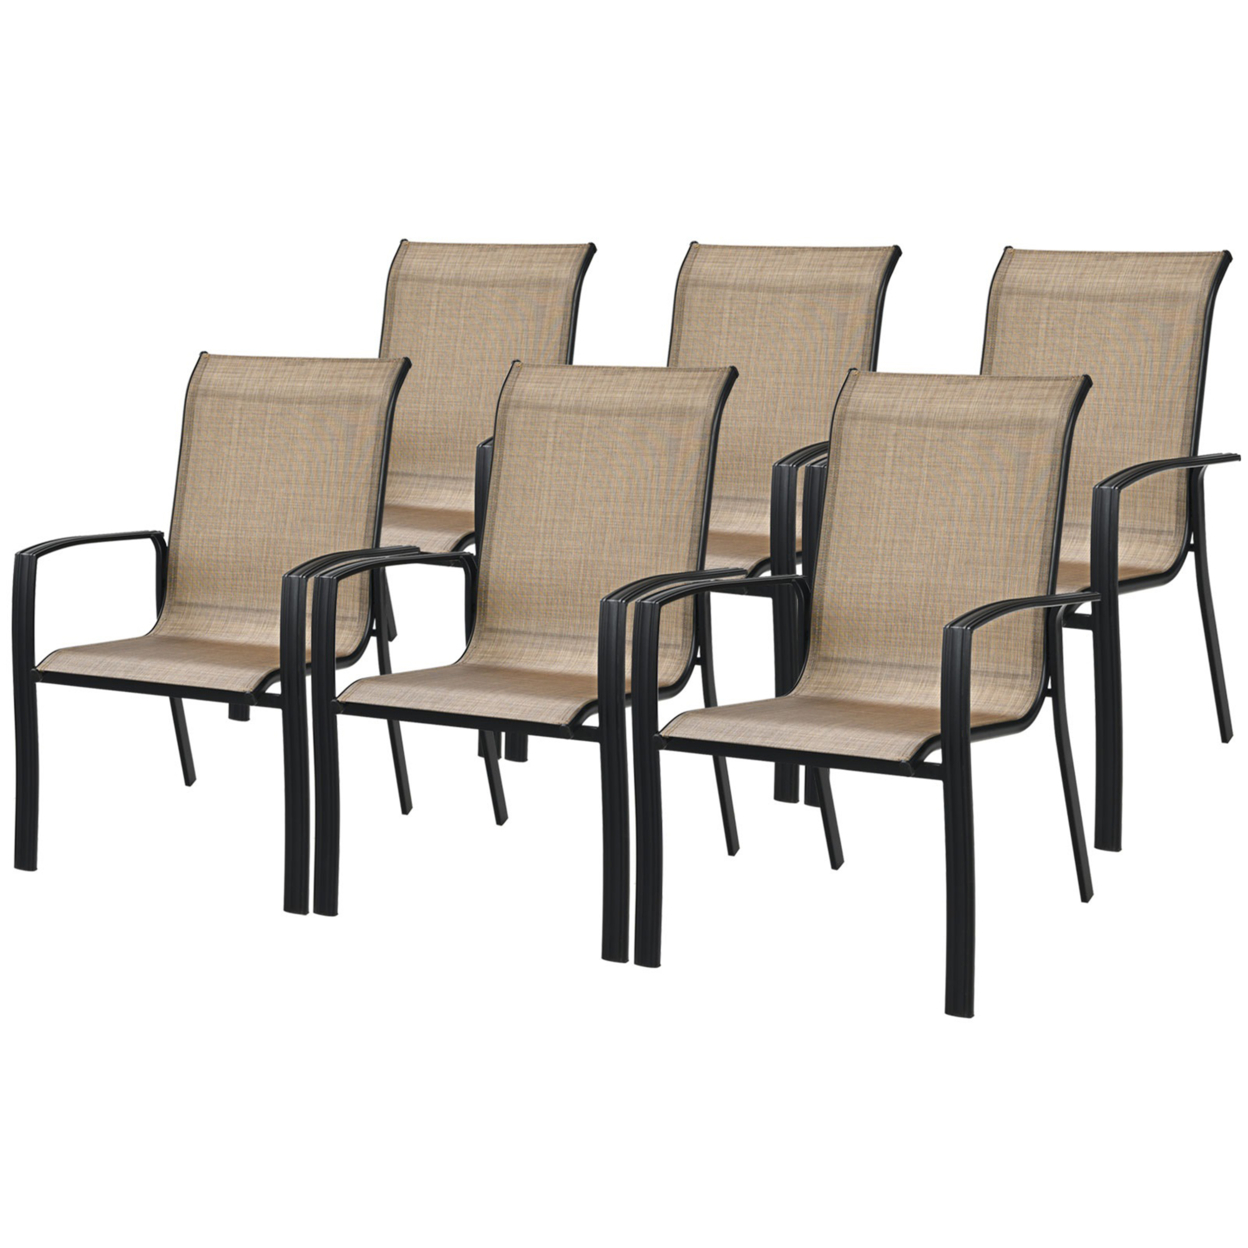 Outdoor Stackable Dining Chair Patio Armchair W/ Breathable Fabric - Brown, 6 Pcs